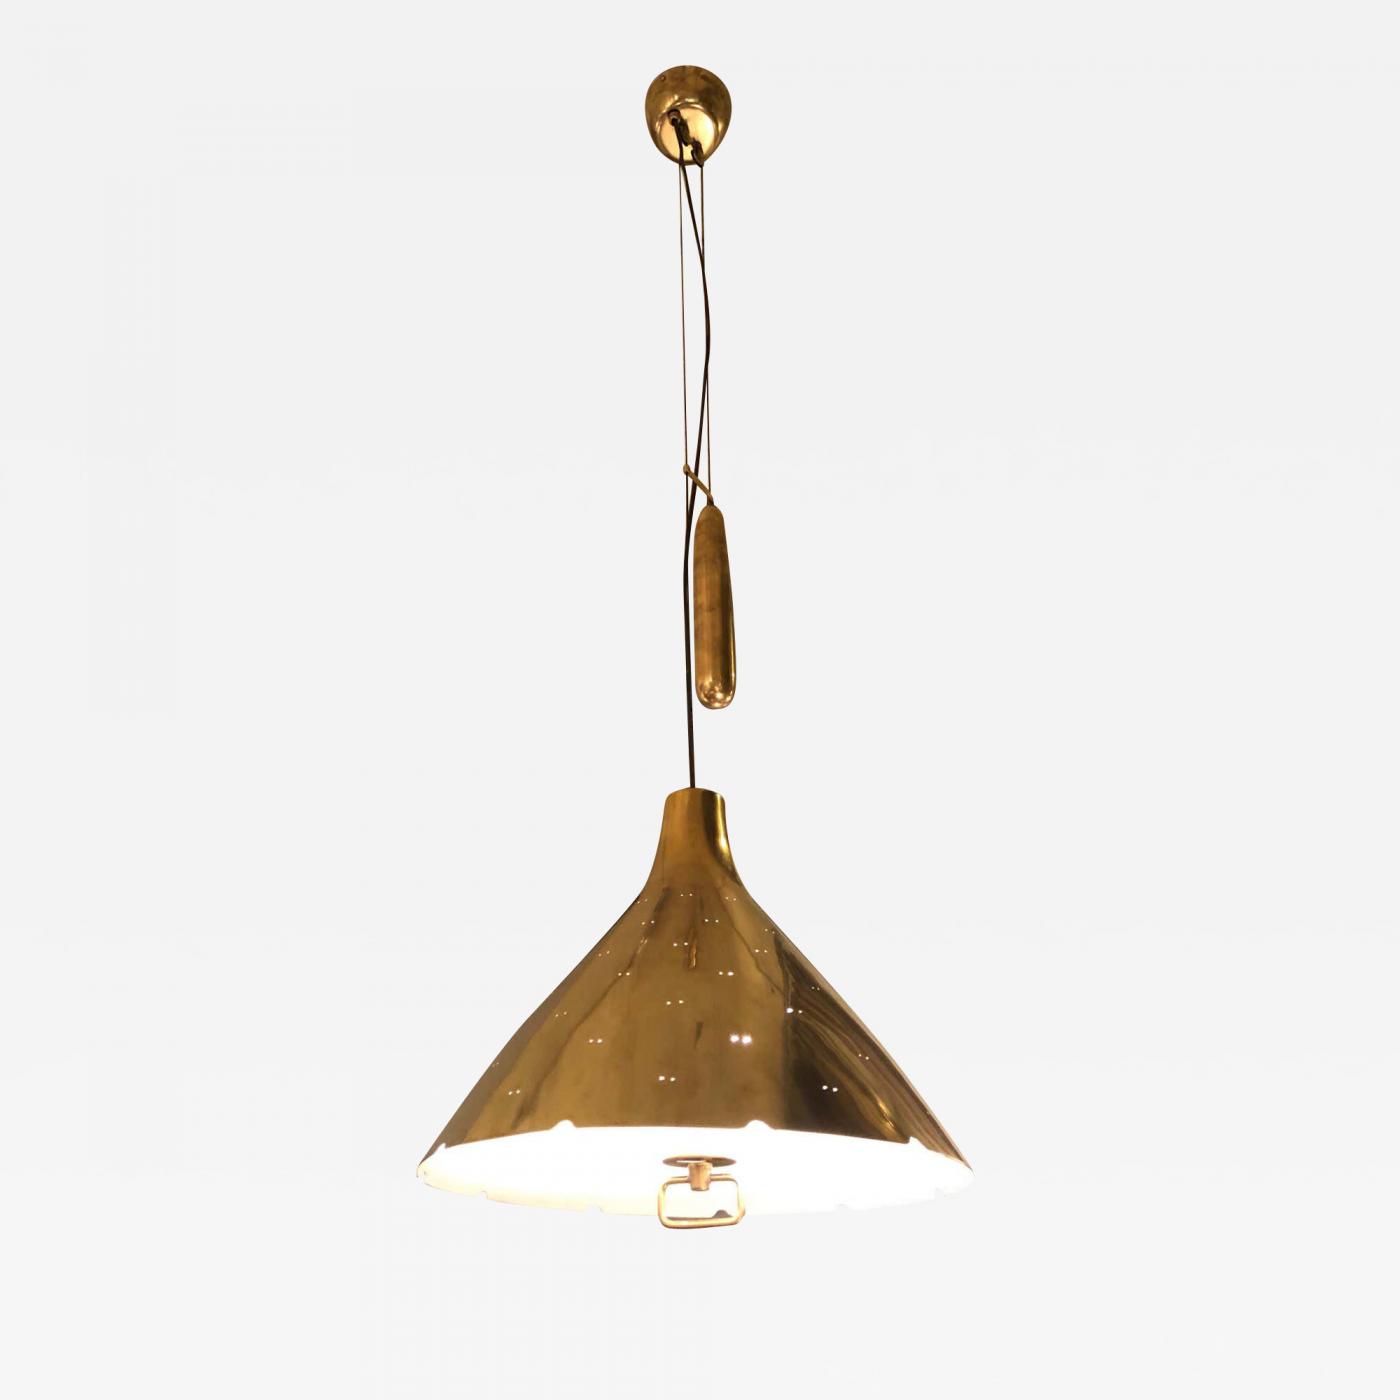 Paavo Tynell Midcentury Brass Adjustable Counterweight Pulley Pendant by Paavo Tynell 1950 426249 1762301